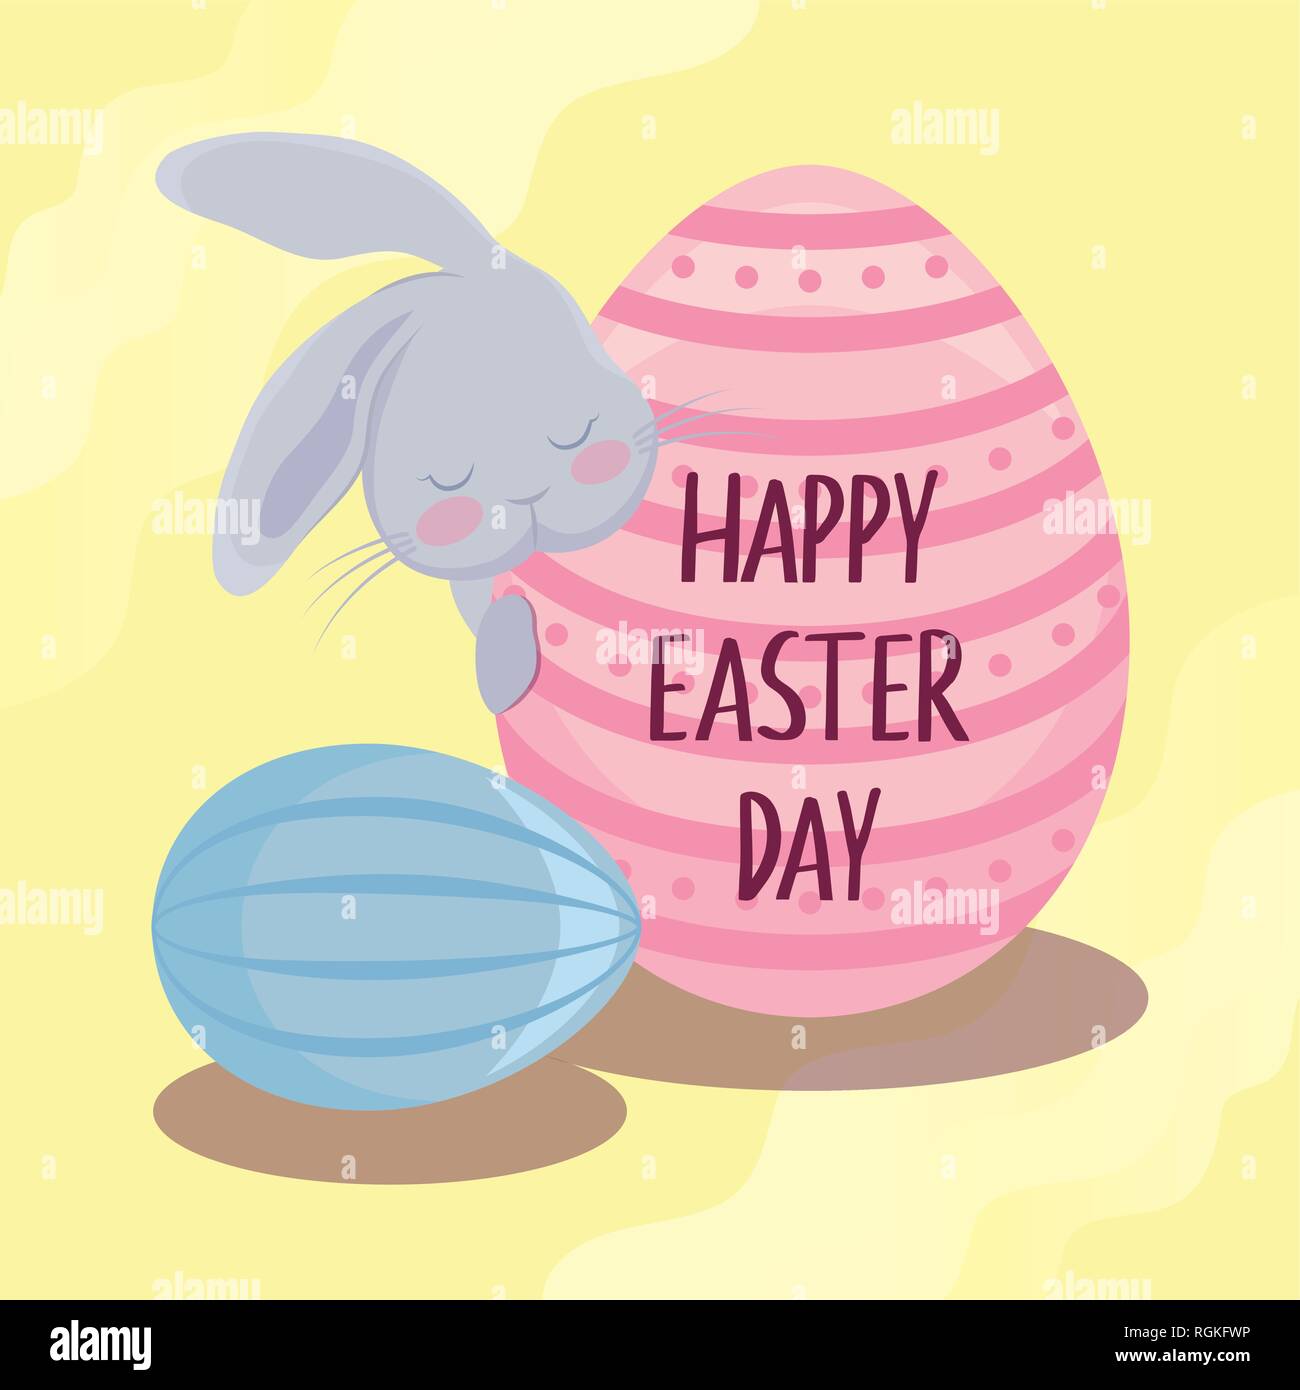 happy easter day card with cute rabbit and eggs vector ...